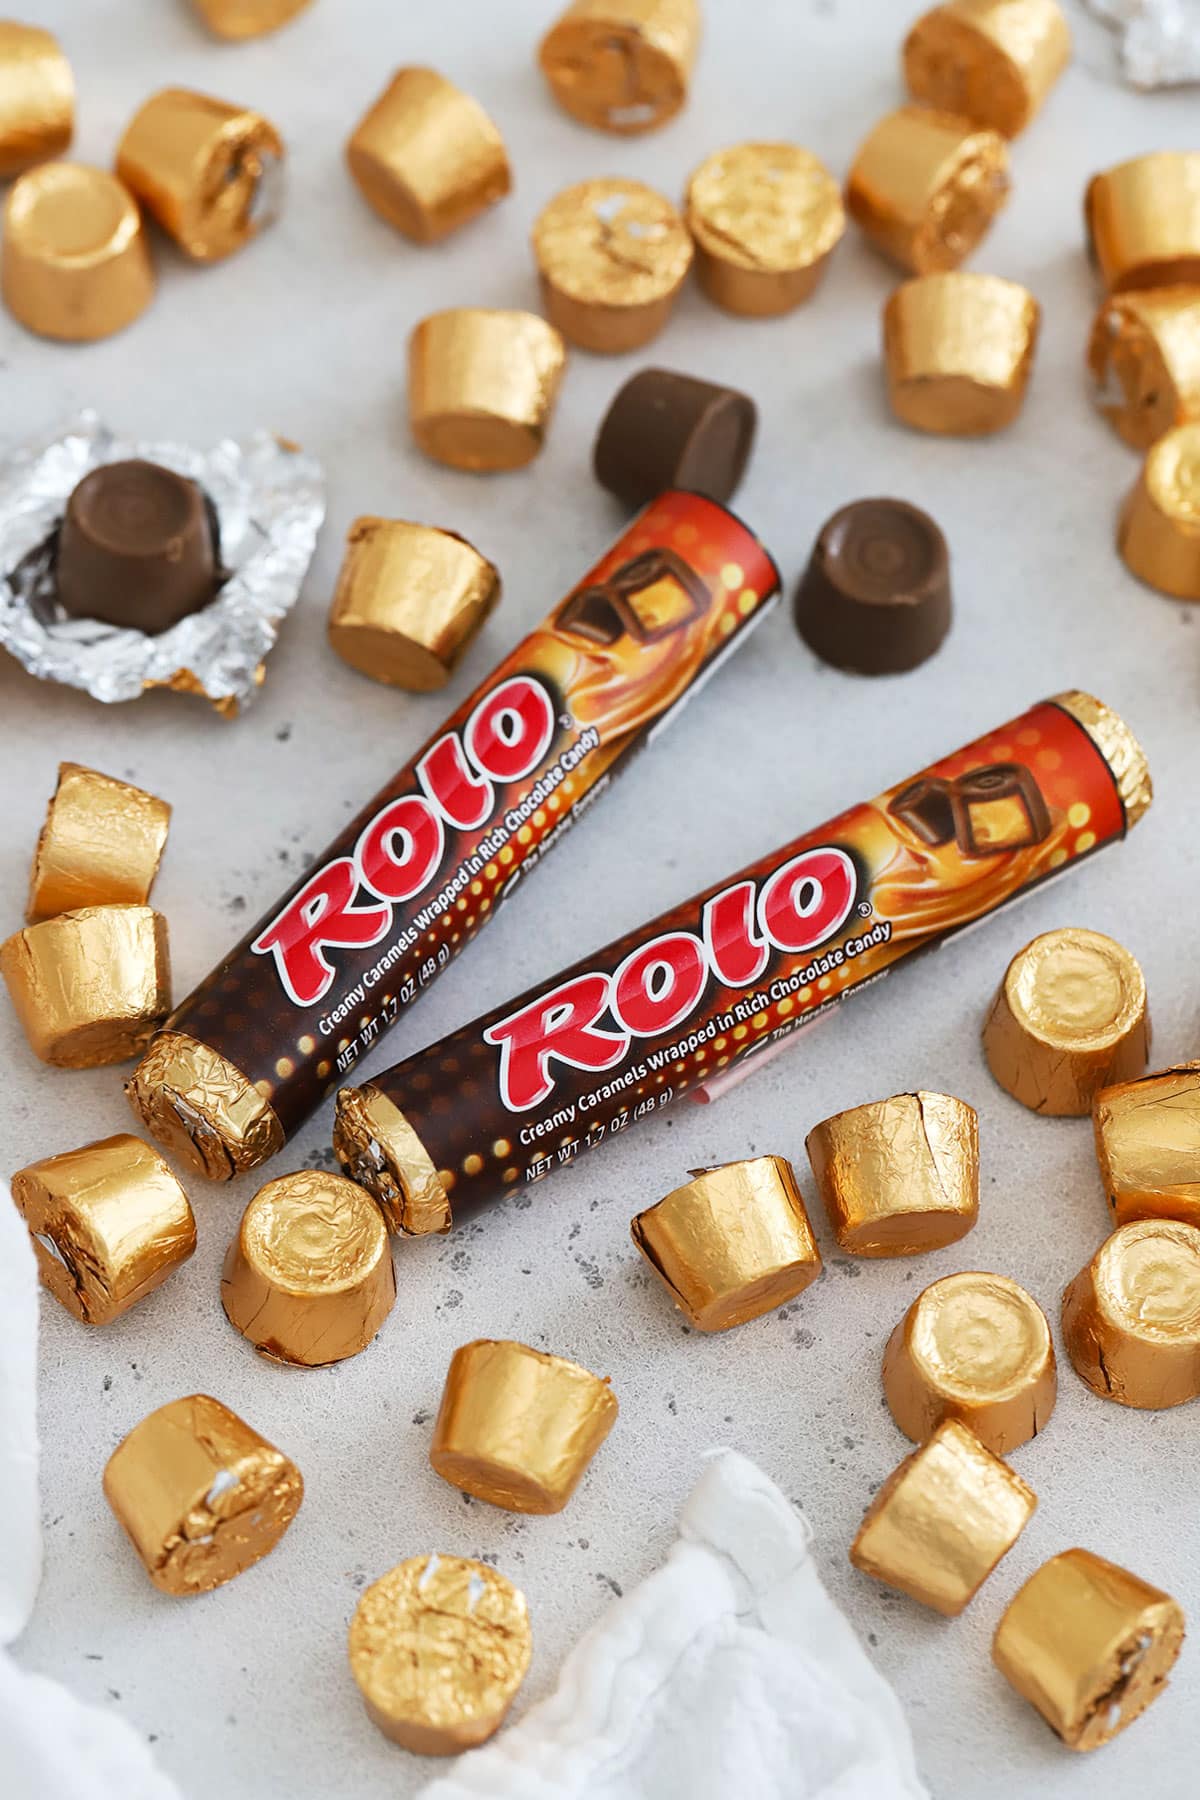 two packages of rolos on a white background with more rolo candy